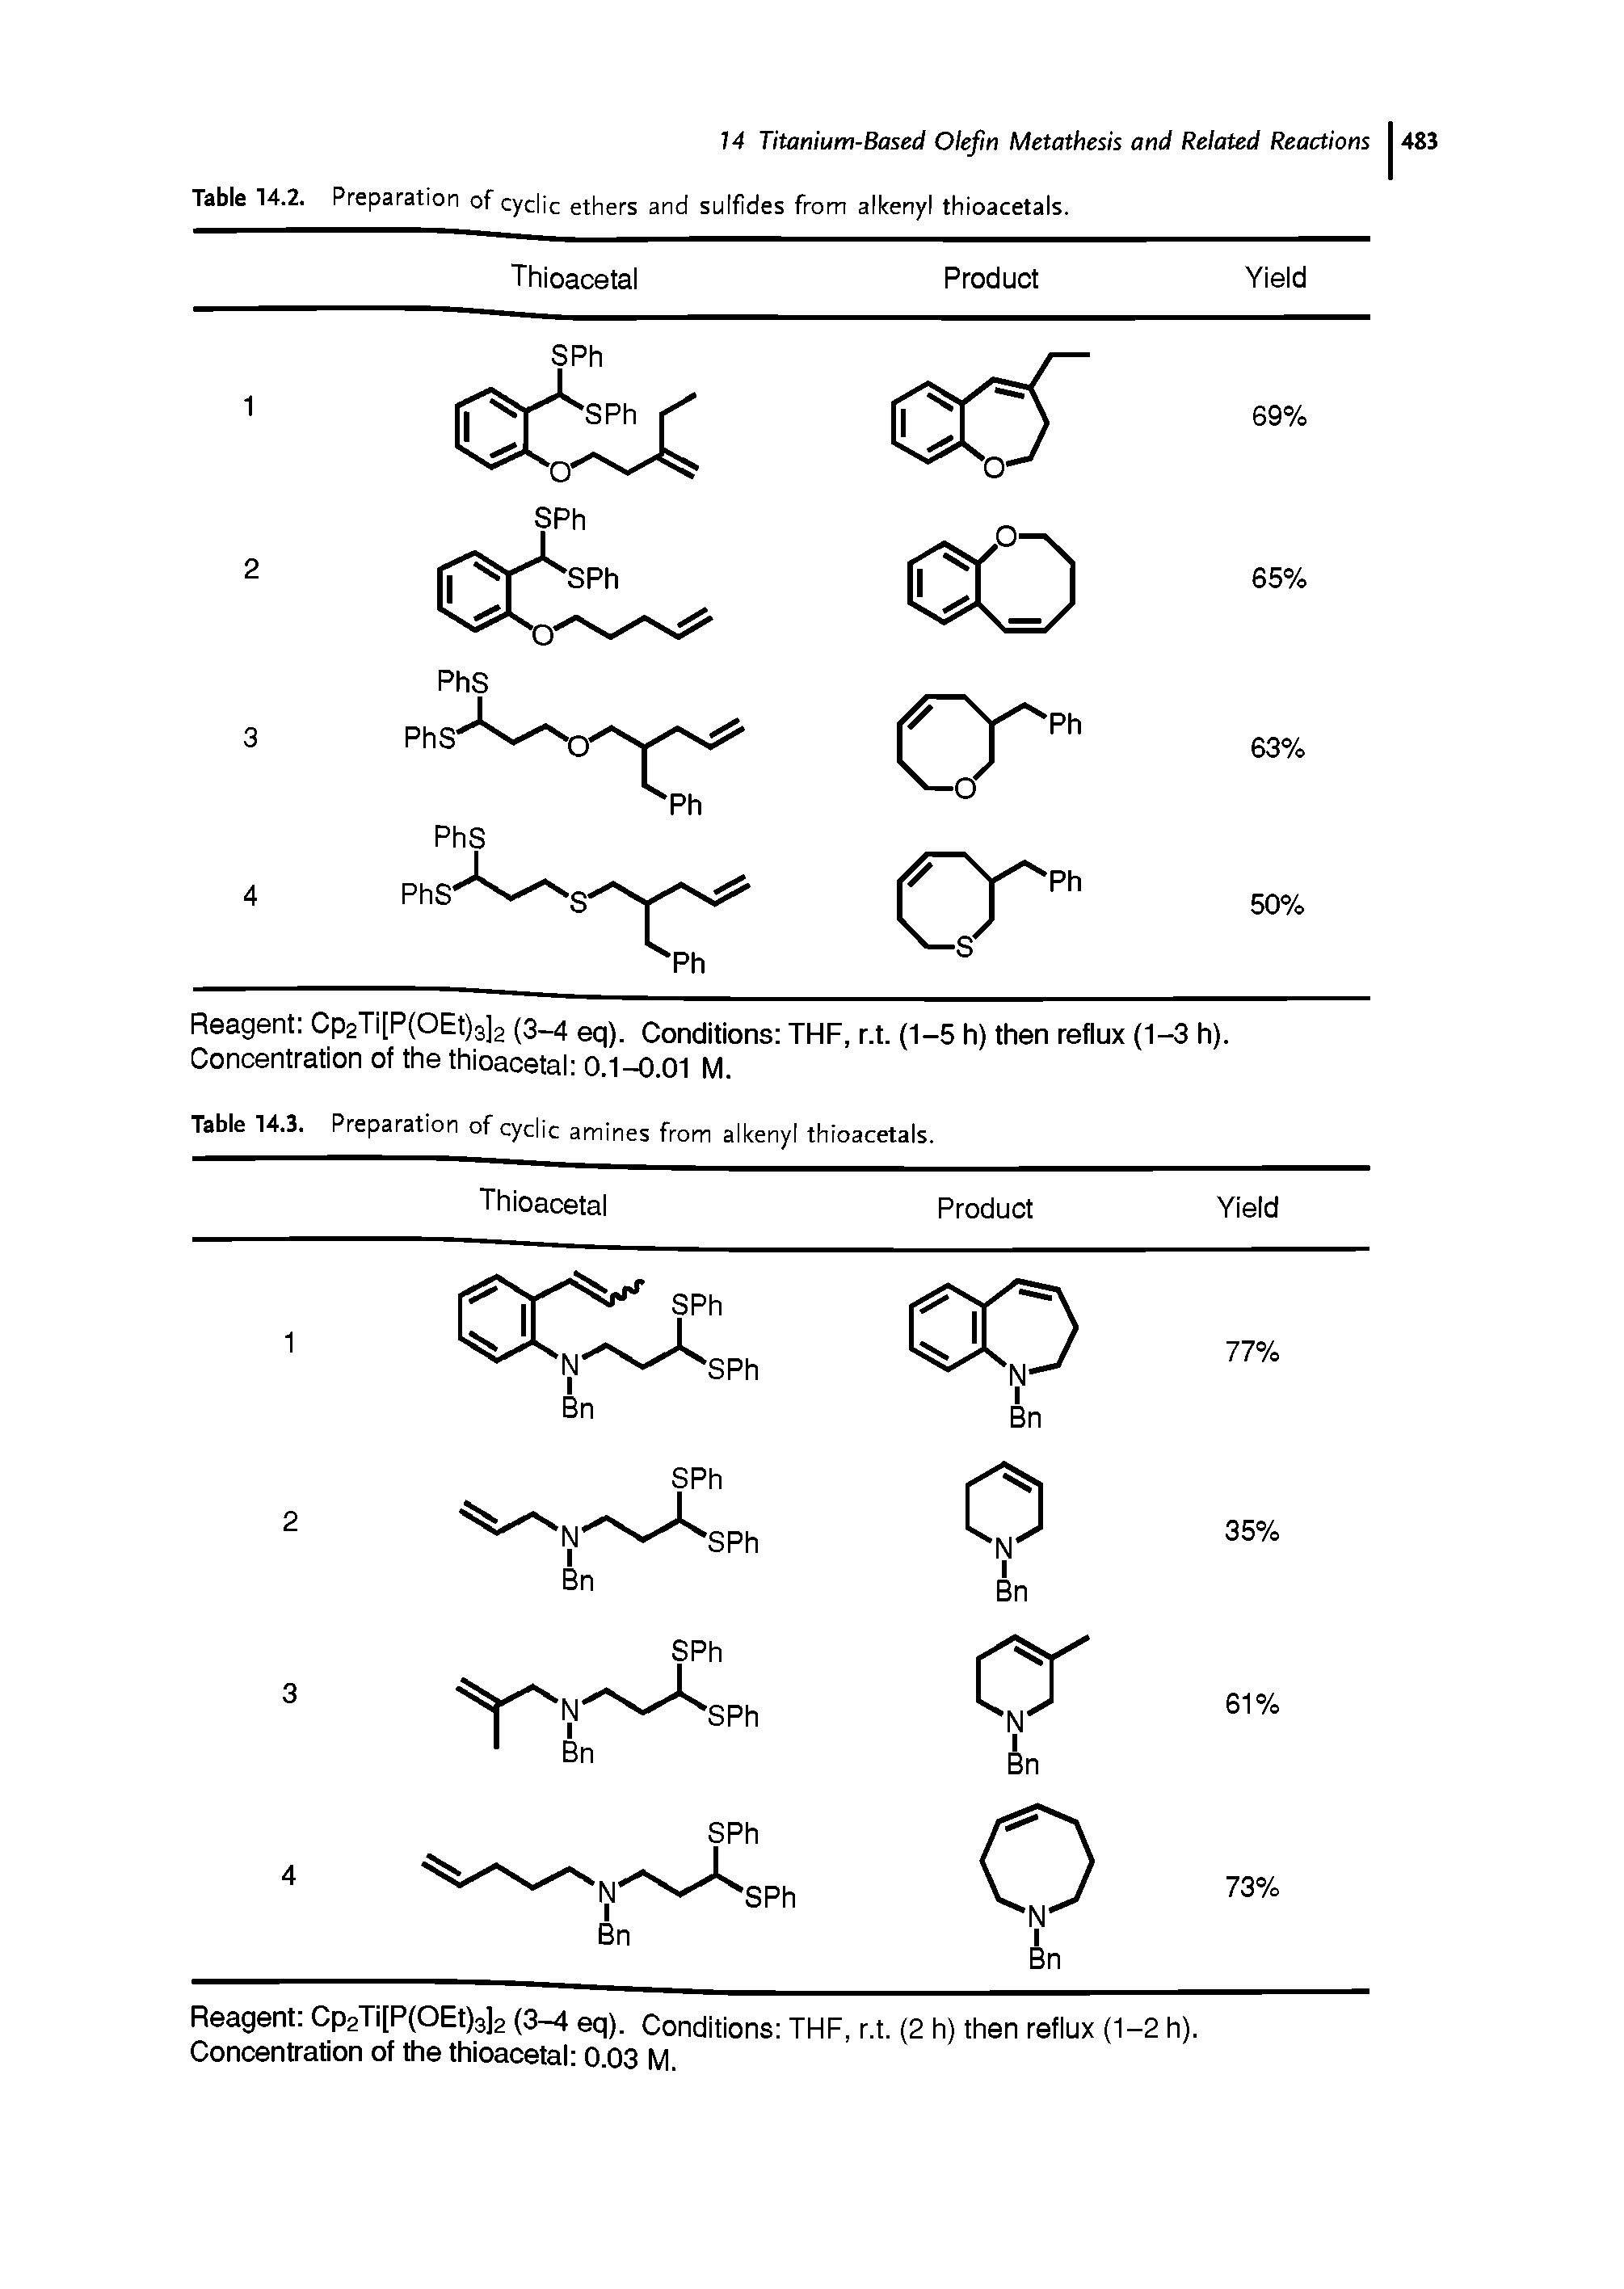 Table 14.3. Preparation of cyclic amines from alkenyl thioacetals. ...